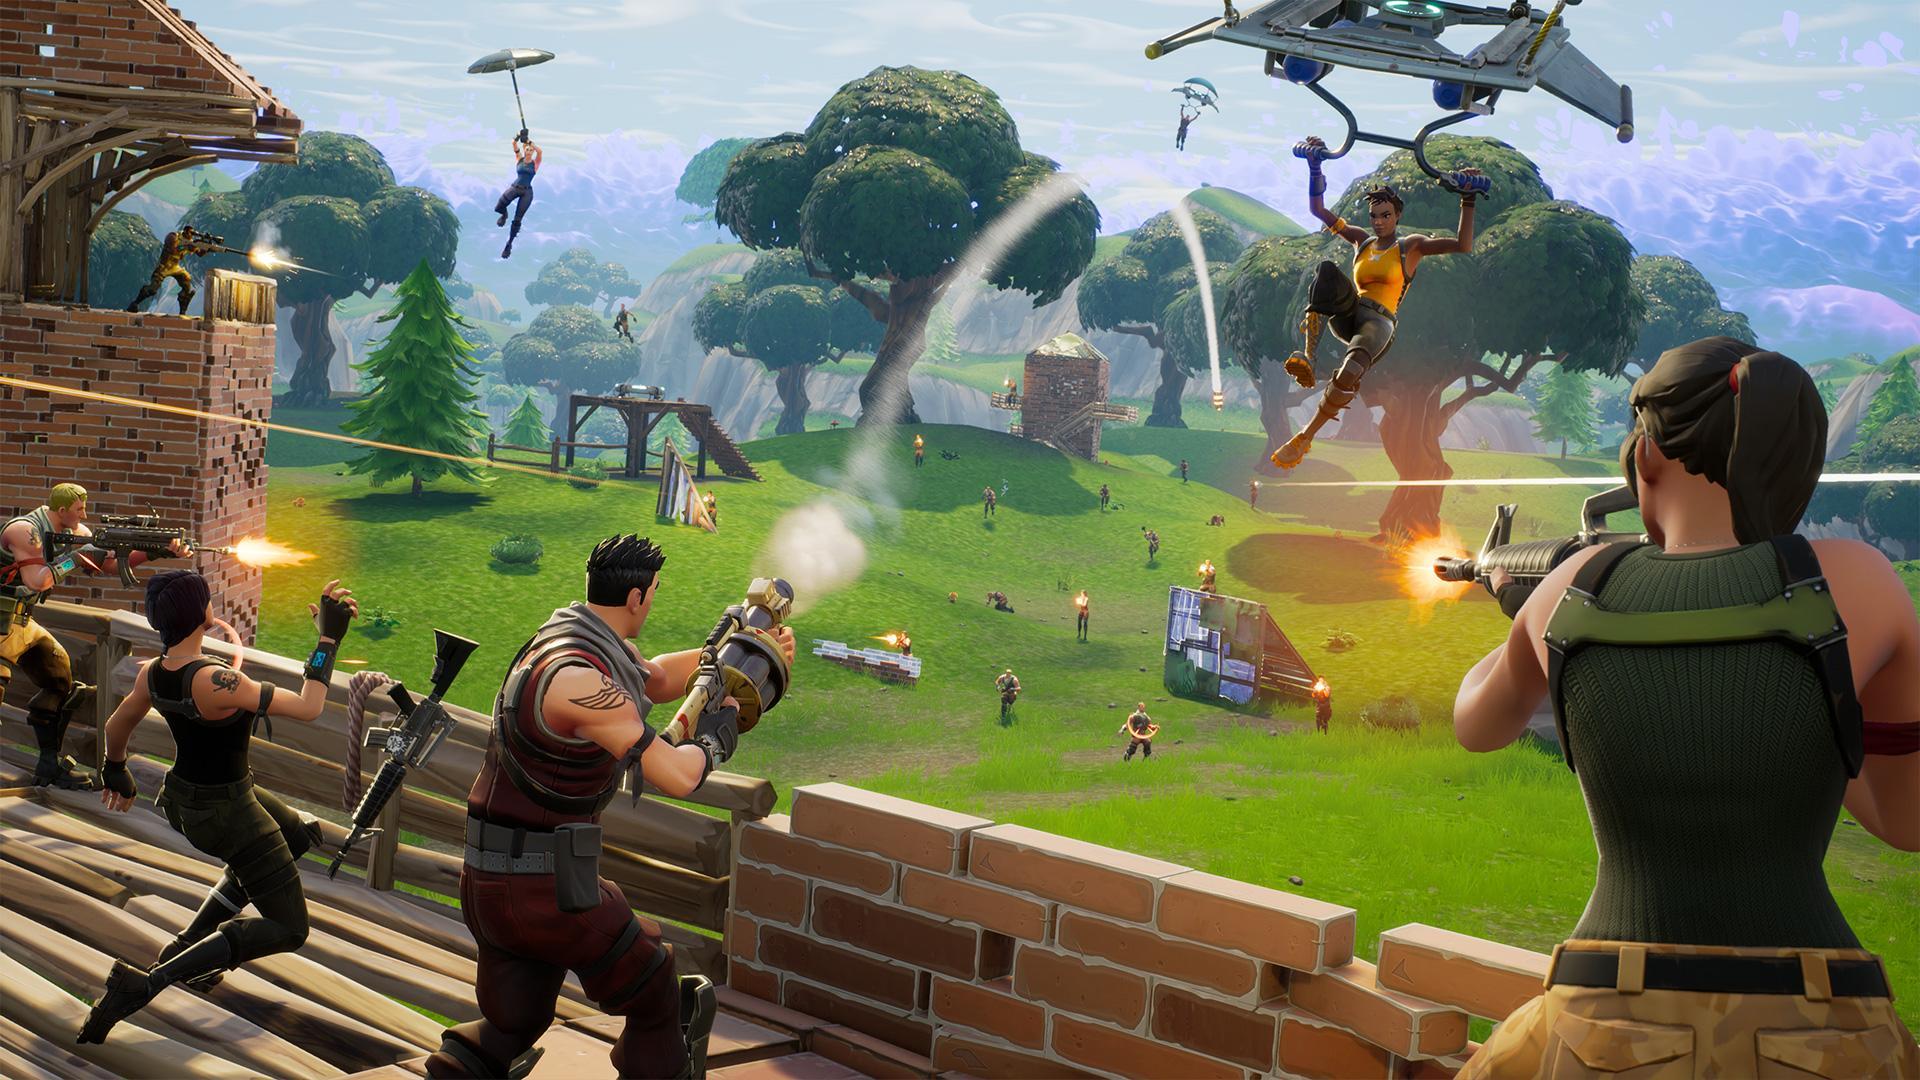 Epic Considering More Than 100 Players in Fortnite Battle Royale